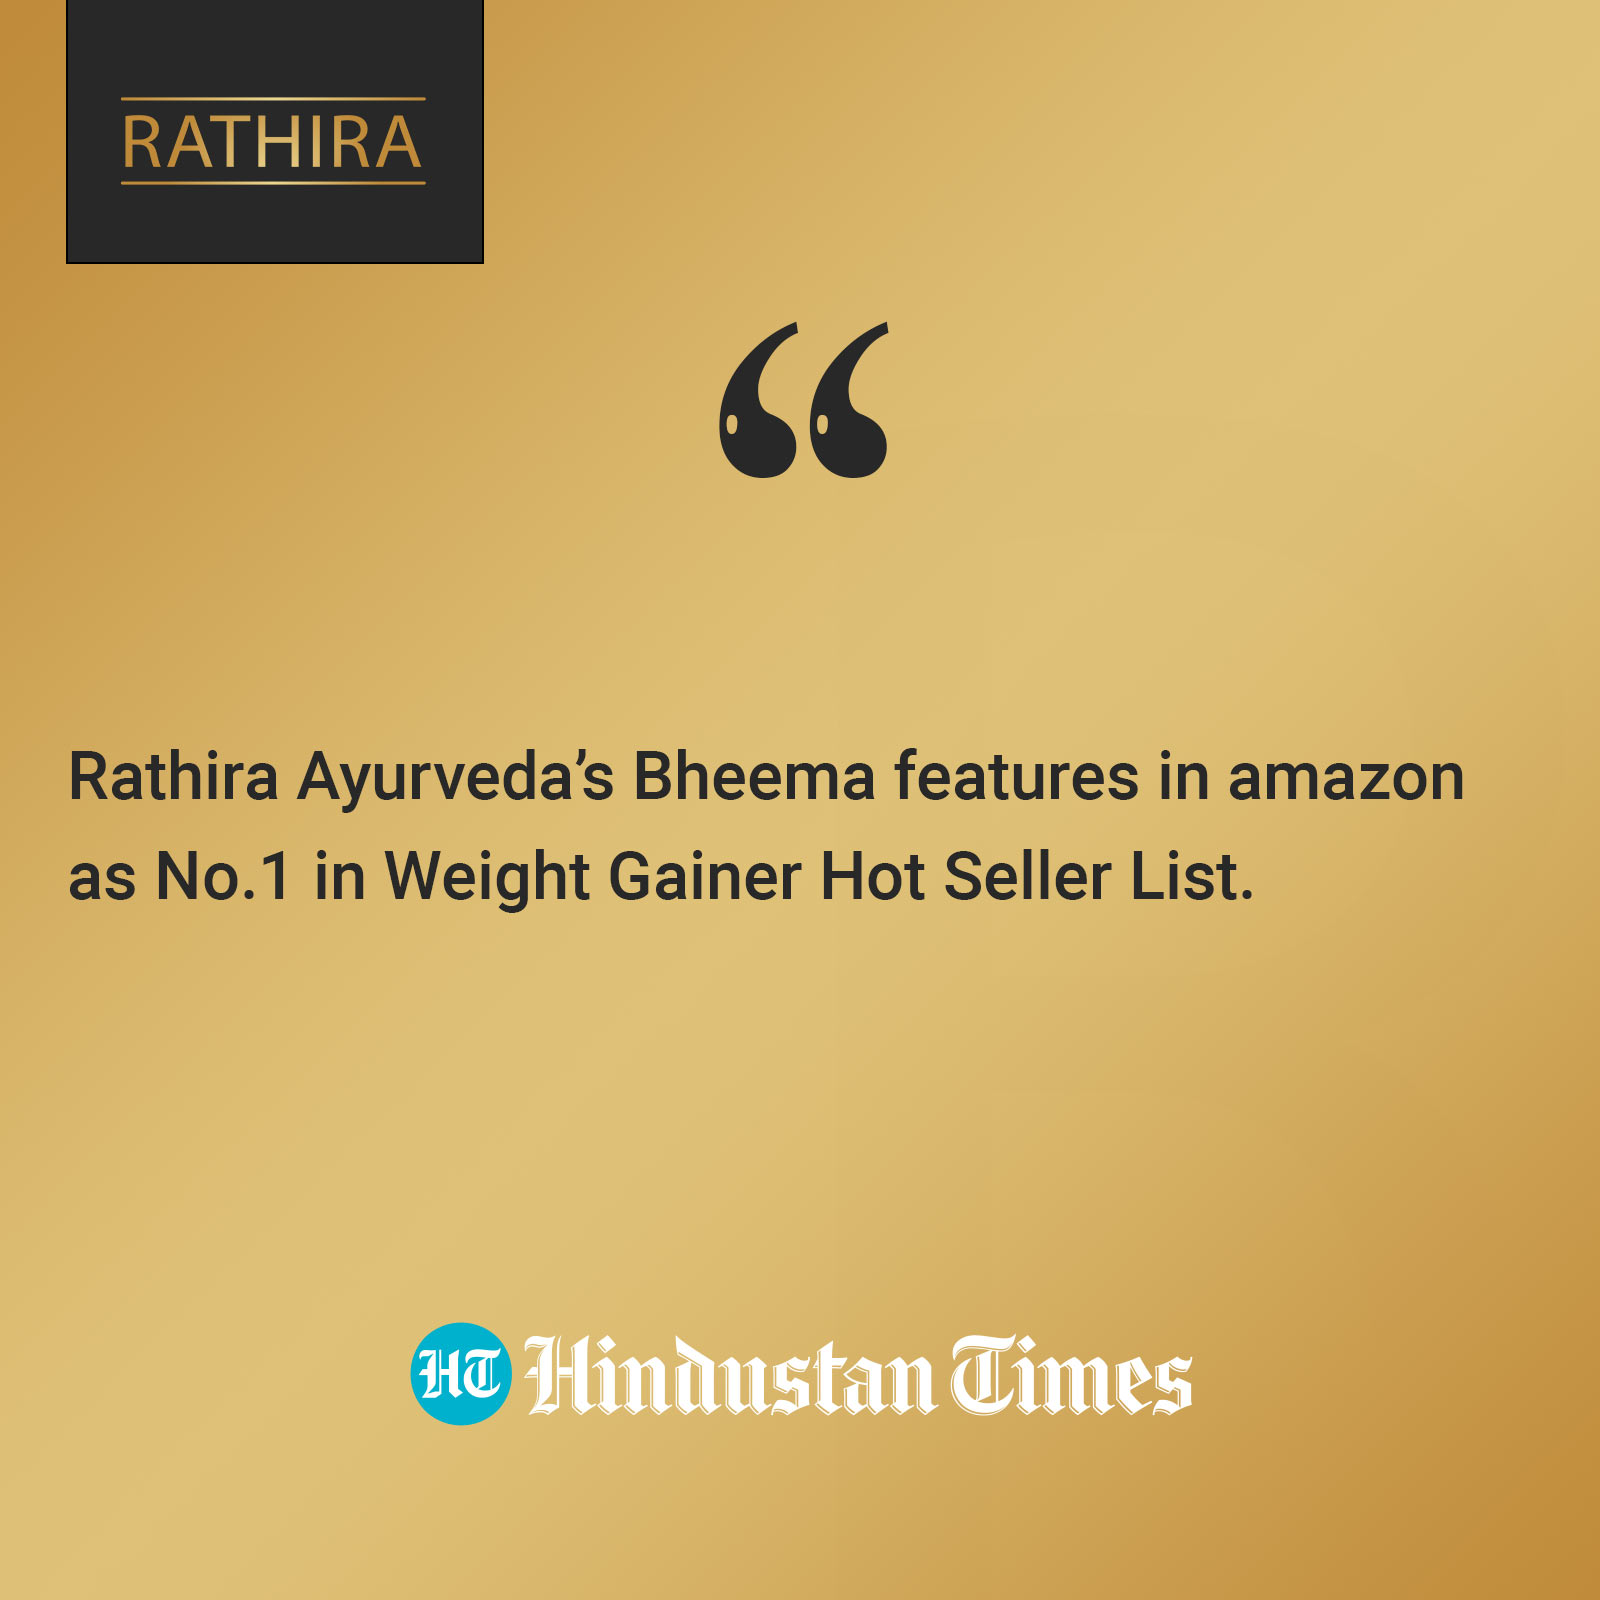  Amazon features Bheema as No.1 in Weight Gainer Hot Seller list